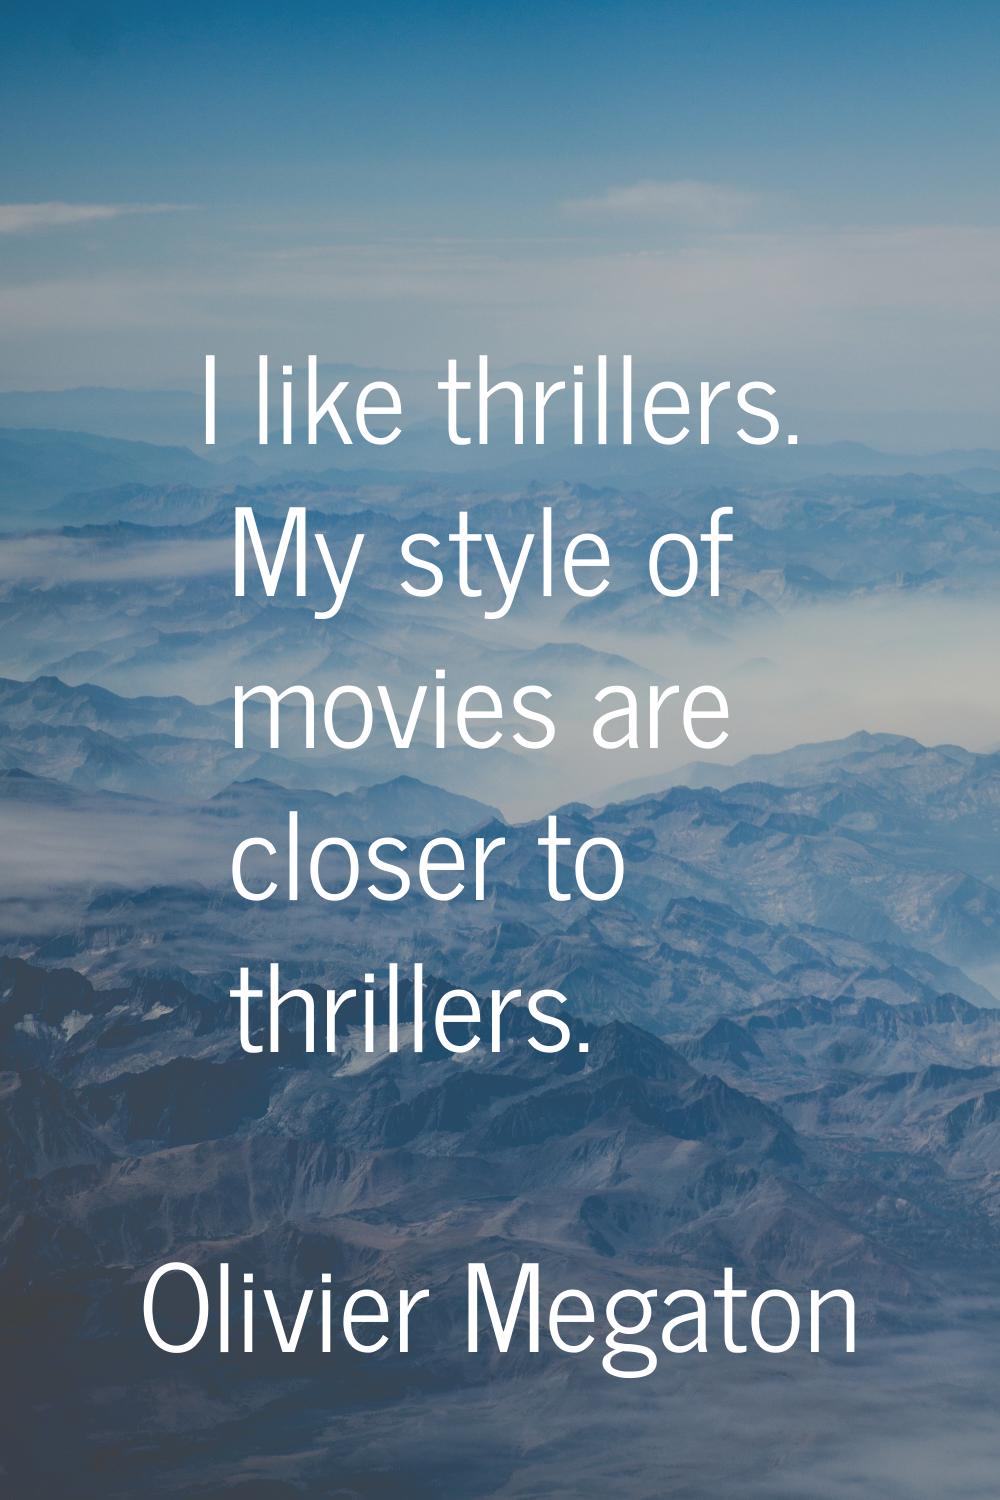 I like thrillers. My style of movies are closer to thrillers.